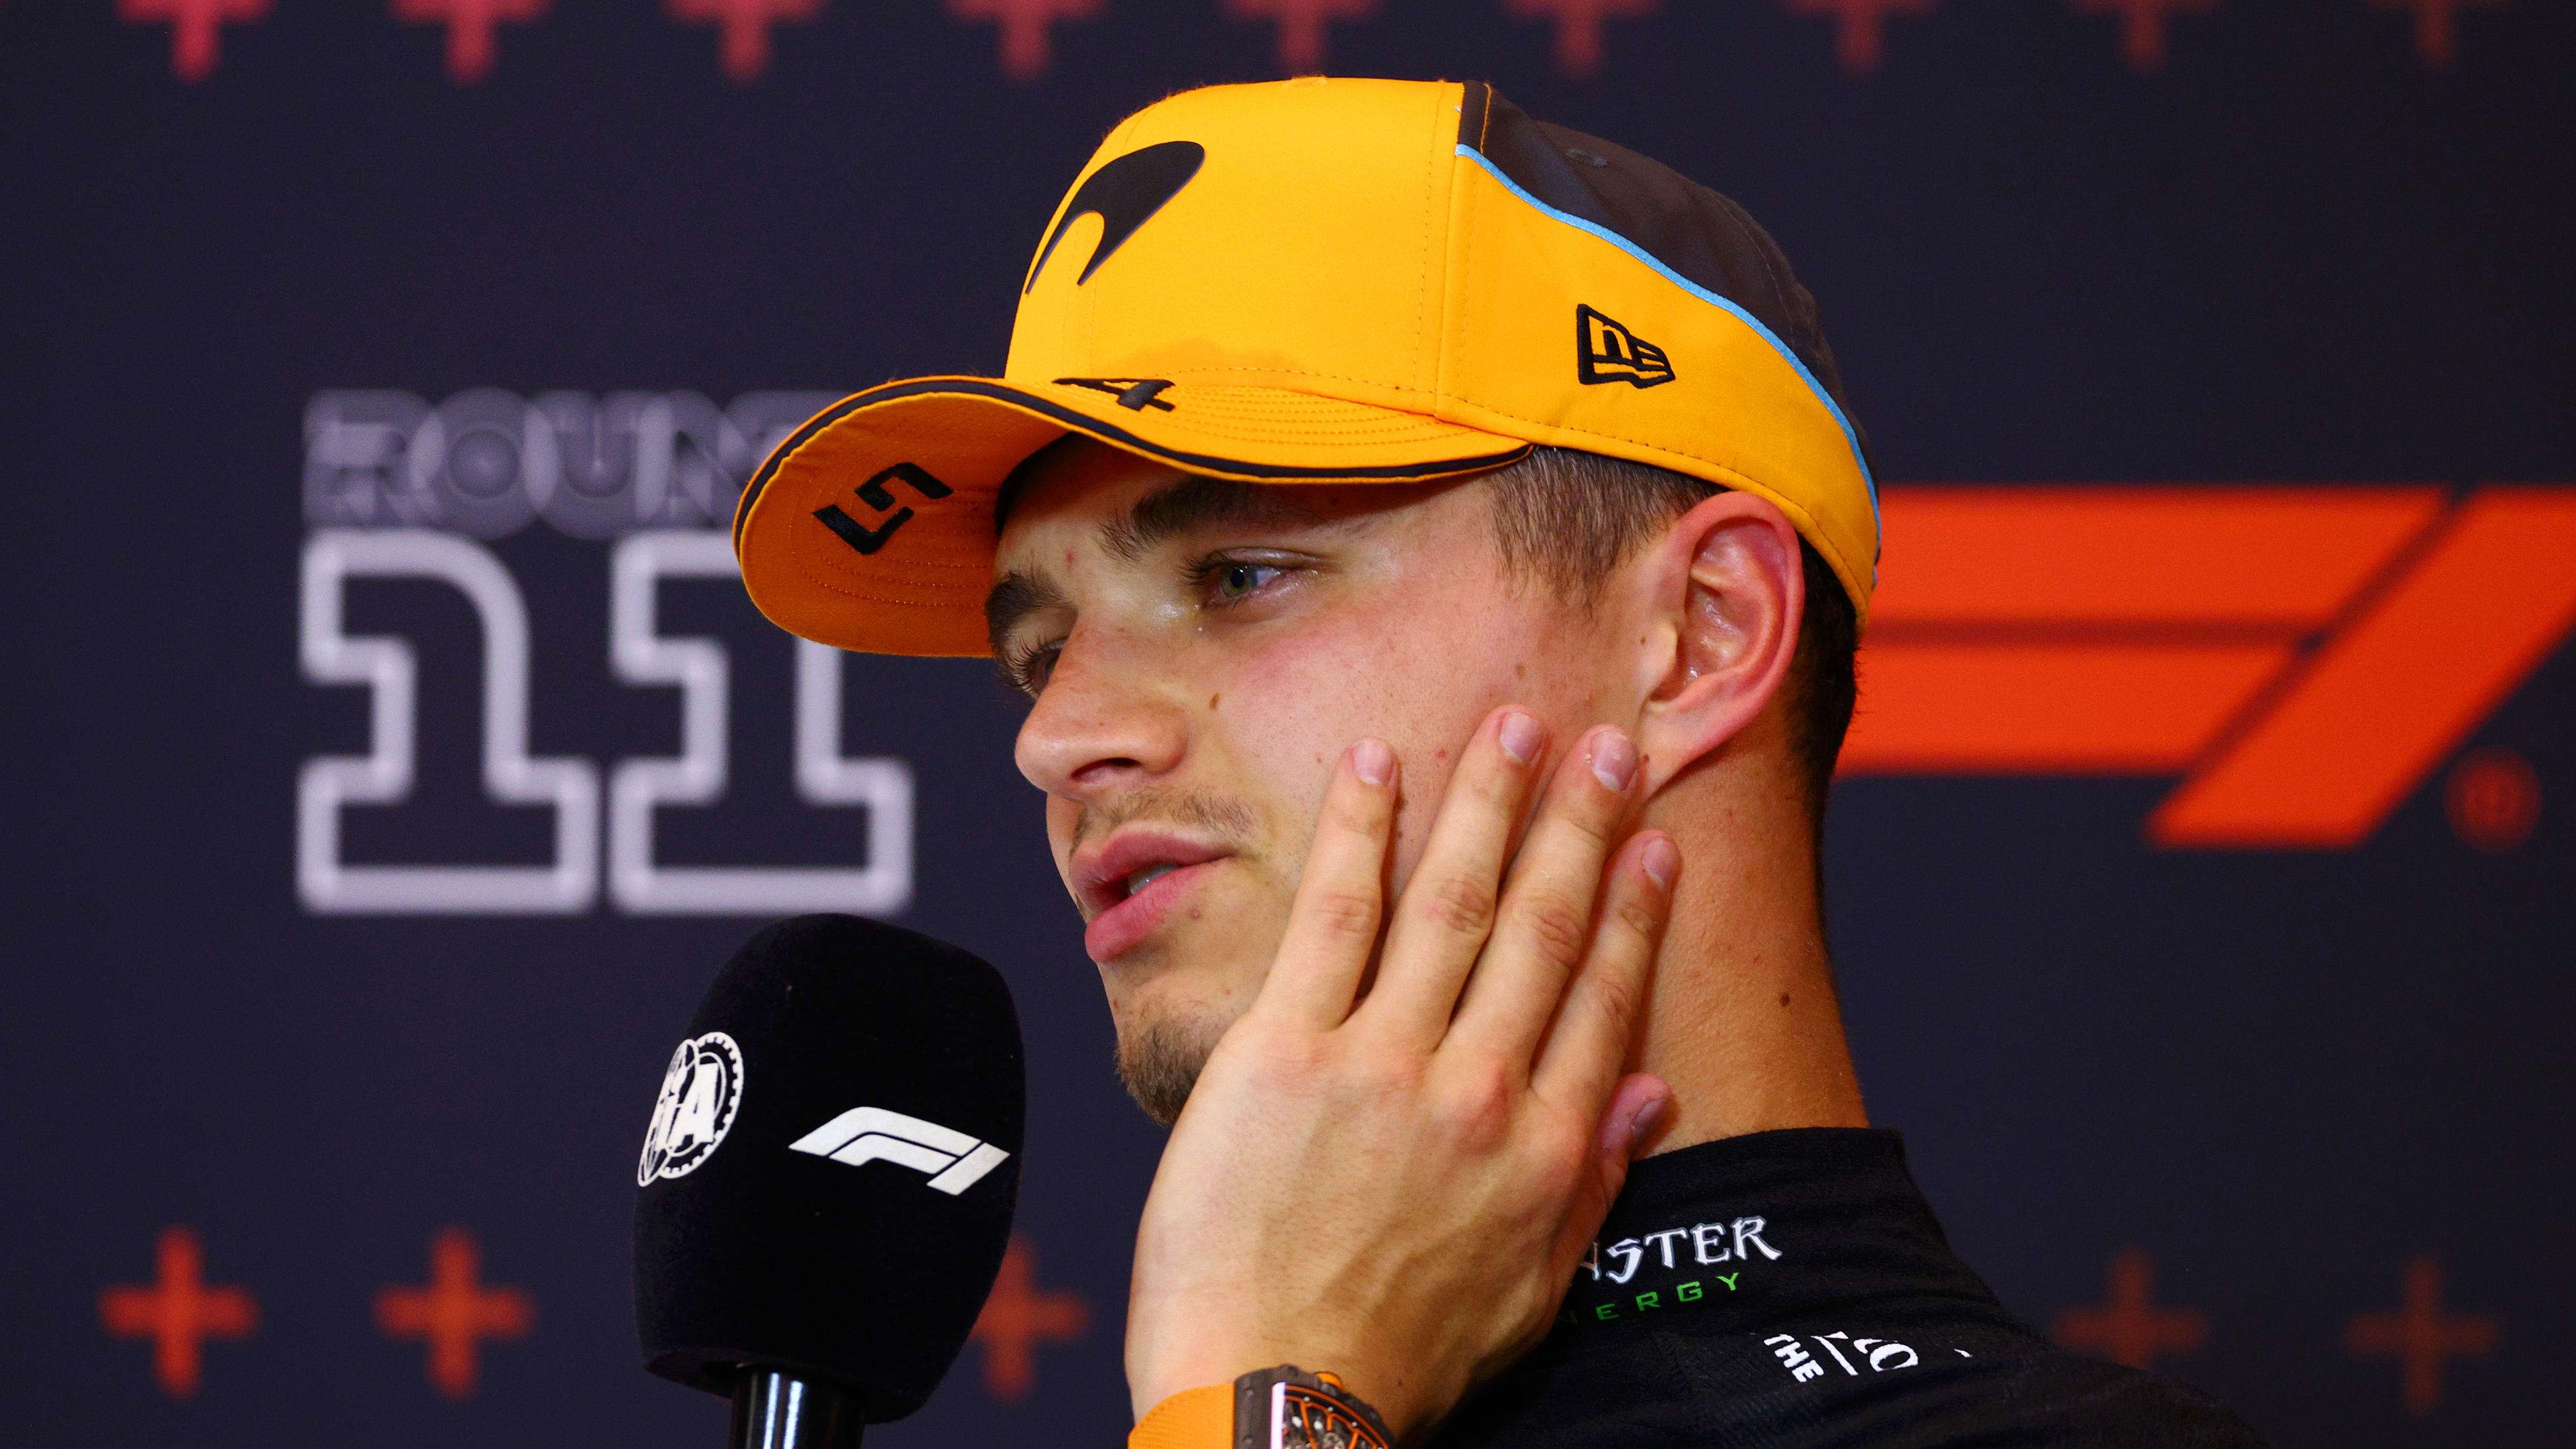 ‘I messed it up’ – Norris rues ‘amateur’ move on Verstappen in Austria Sprint as he vows to take the fight again